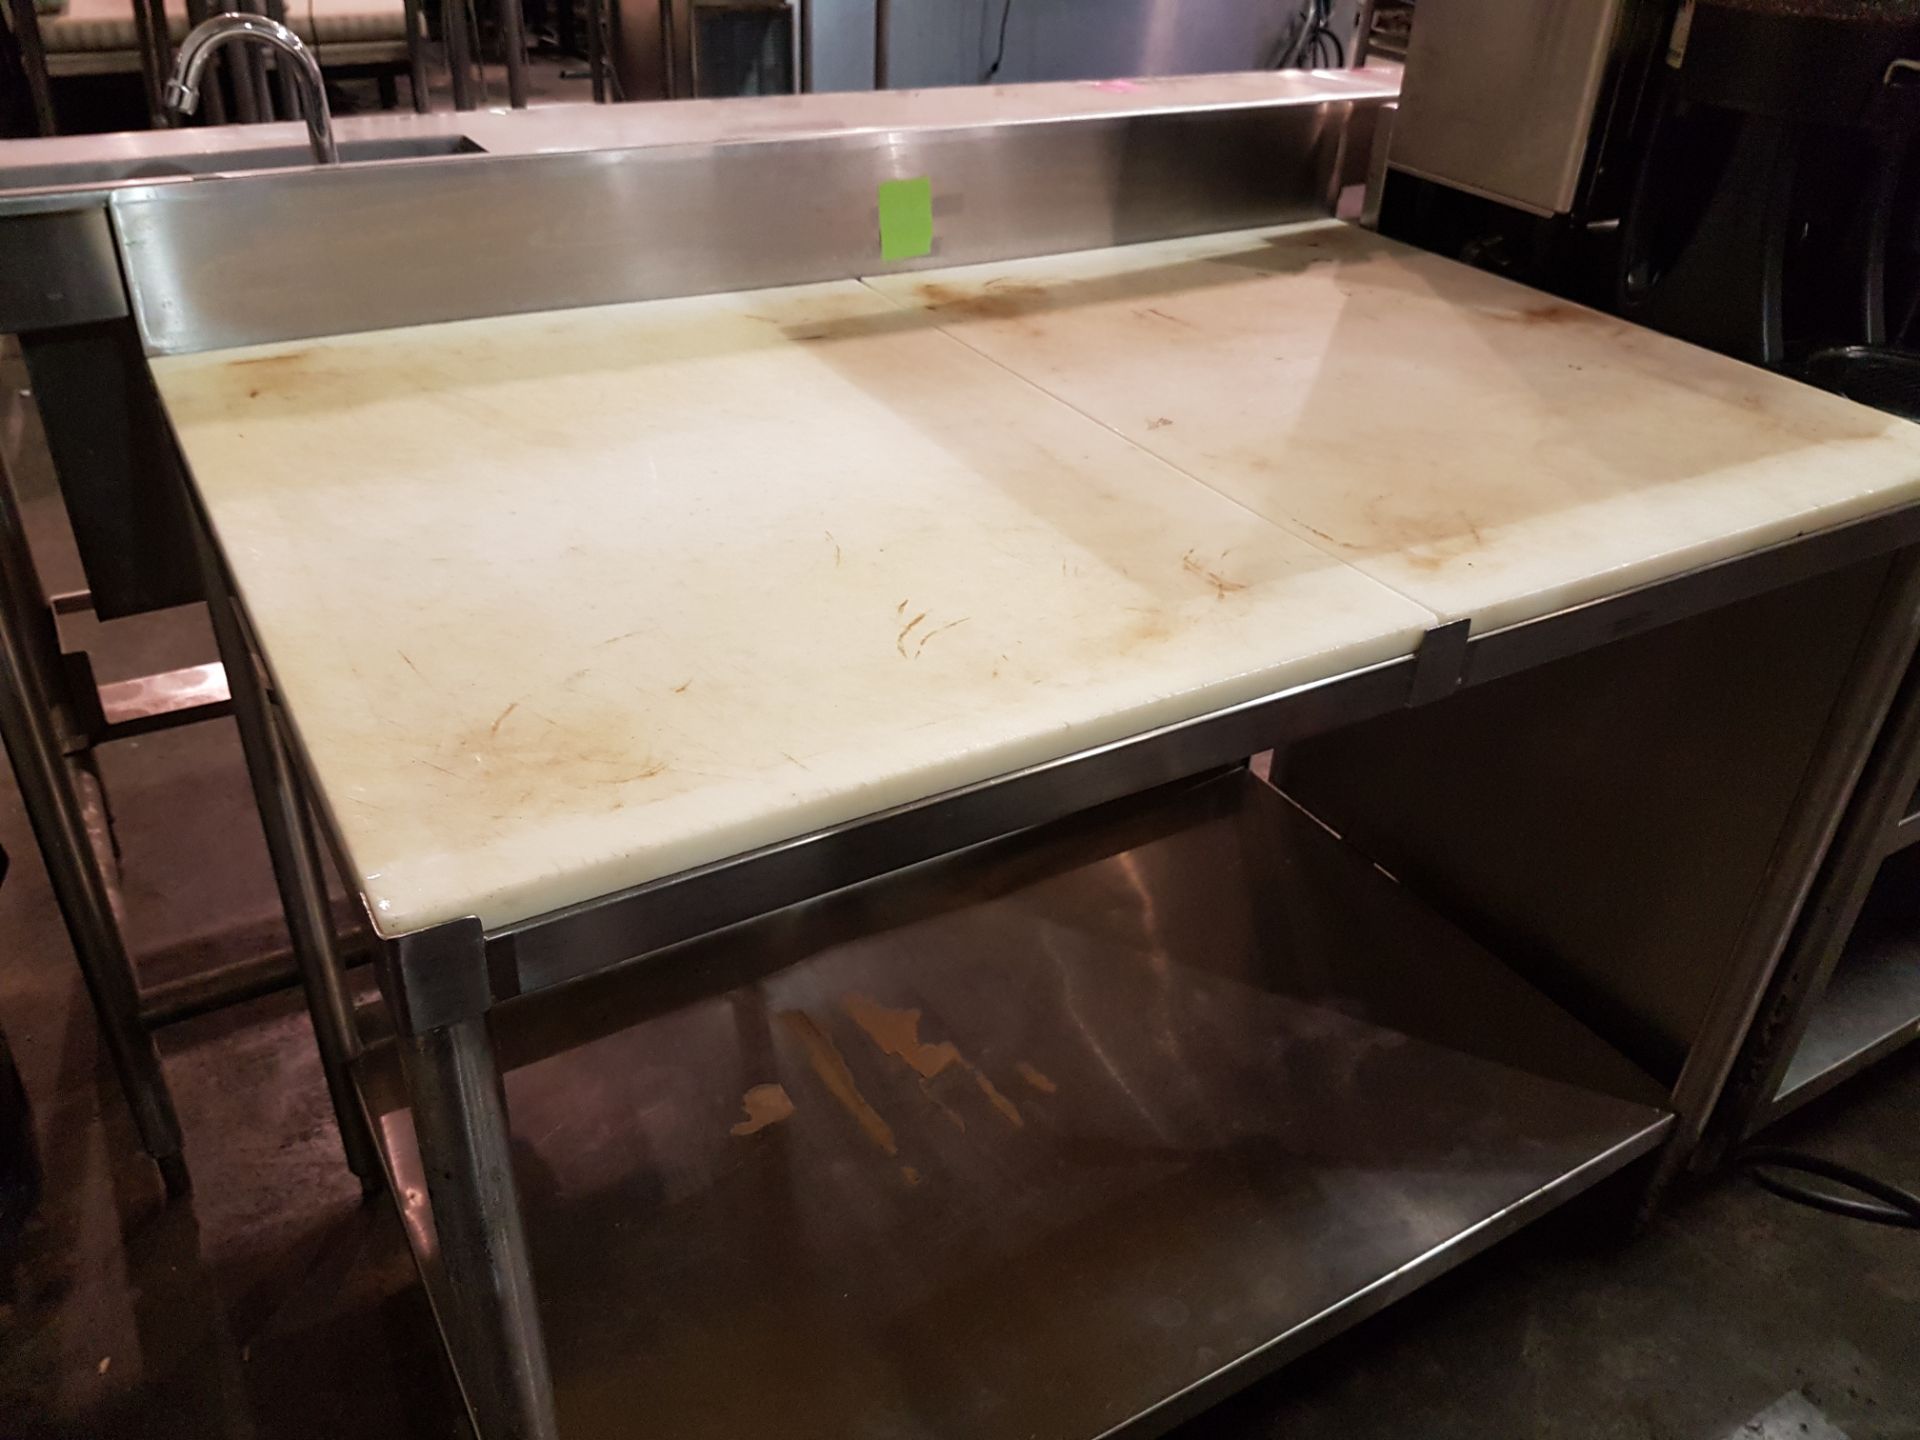 30" x 48" Stainless Table with Cutting Board Top